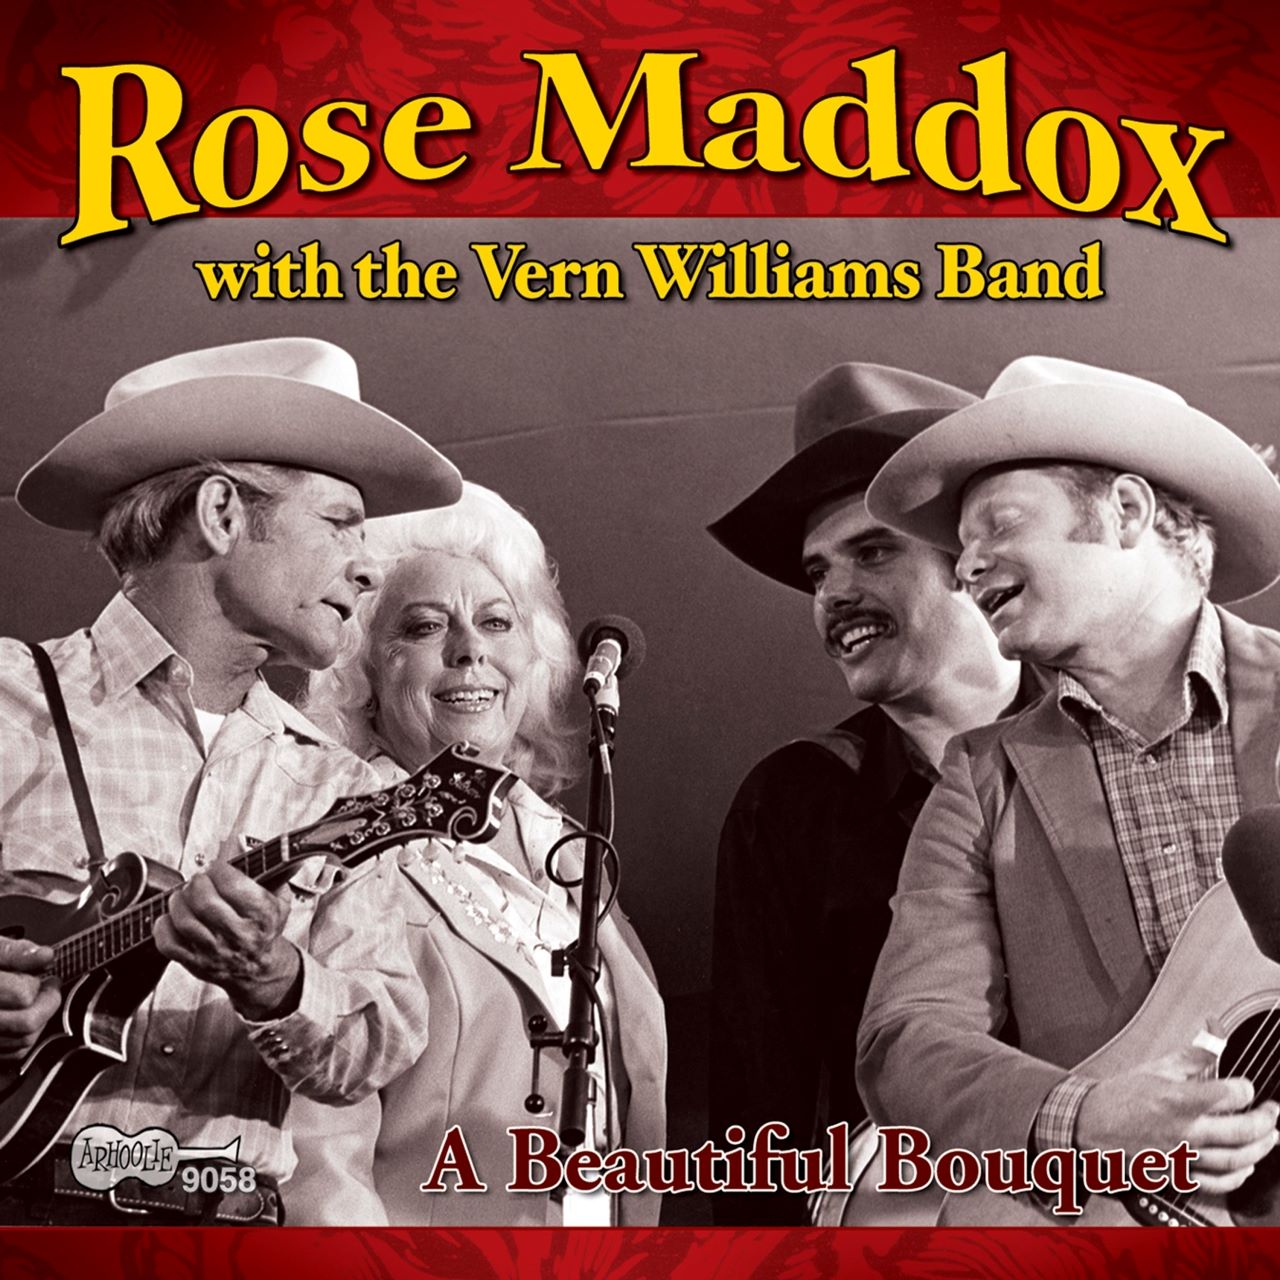 Rose Maddox & The Vern Williams Band - A Beautiful Bouquet cover album